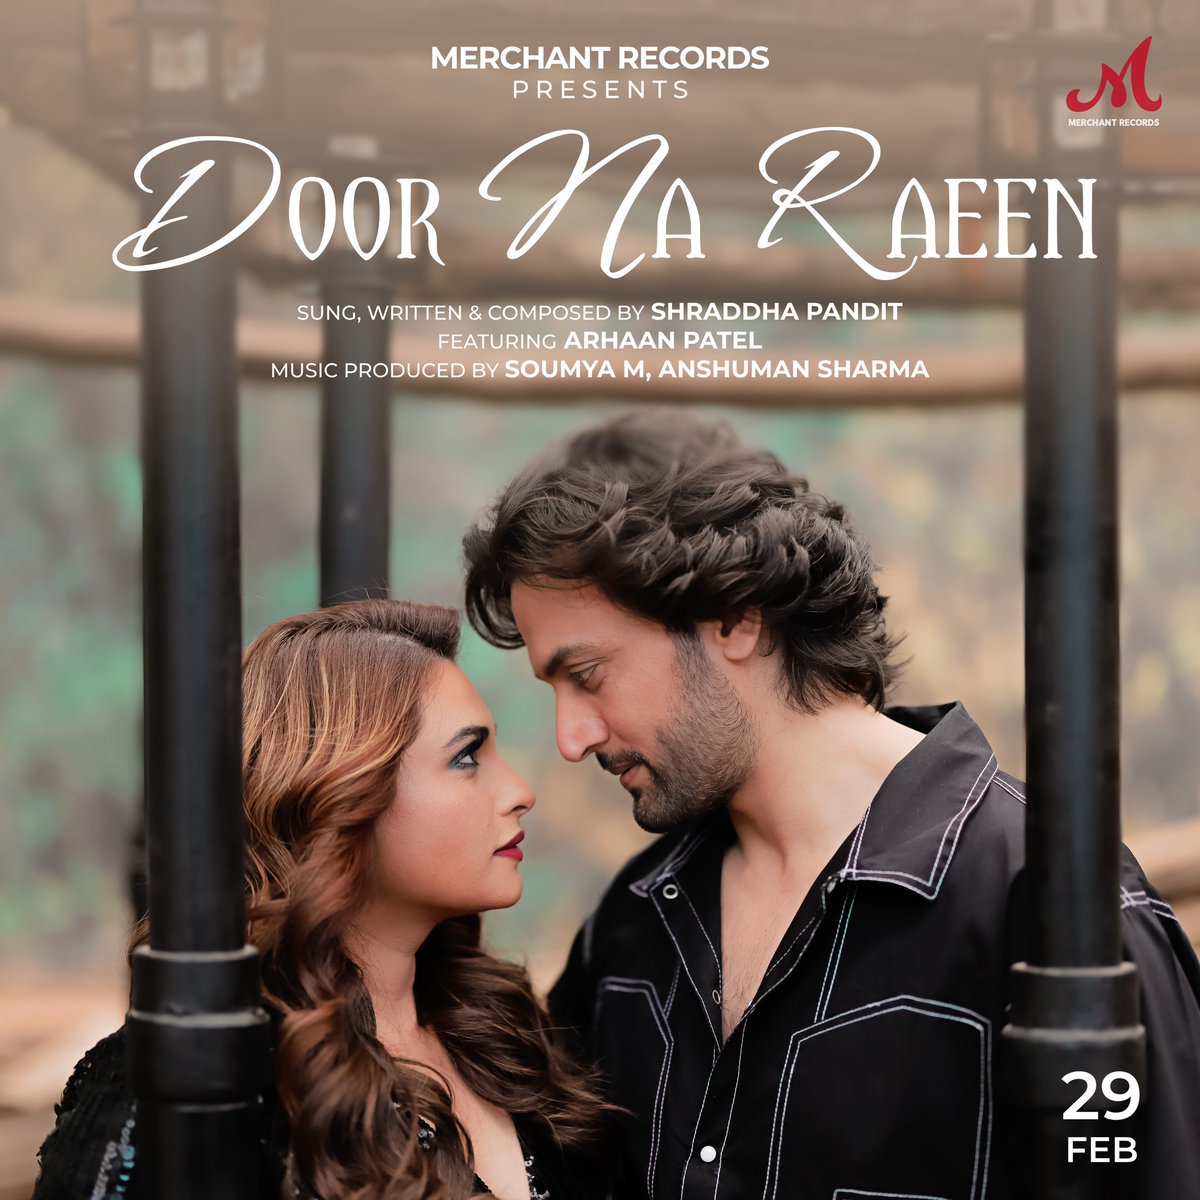 #DoorNaRaeen A musical journey by @shraddhapandit, featuring @arhaanpatel2 Produced by @soumyaM and @anshumonsharma. Releasing Feb 29th on @SlimSulaiman’s YouTube and audio platforms. Stay tuned! 🎶 #MerchantRecords #SalimSulaiman